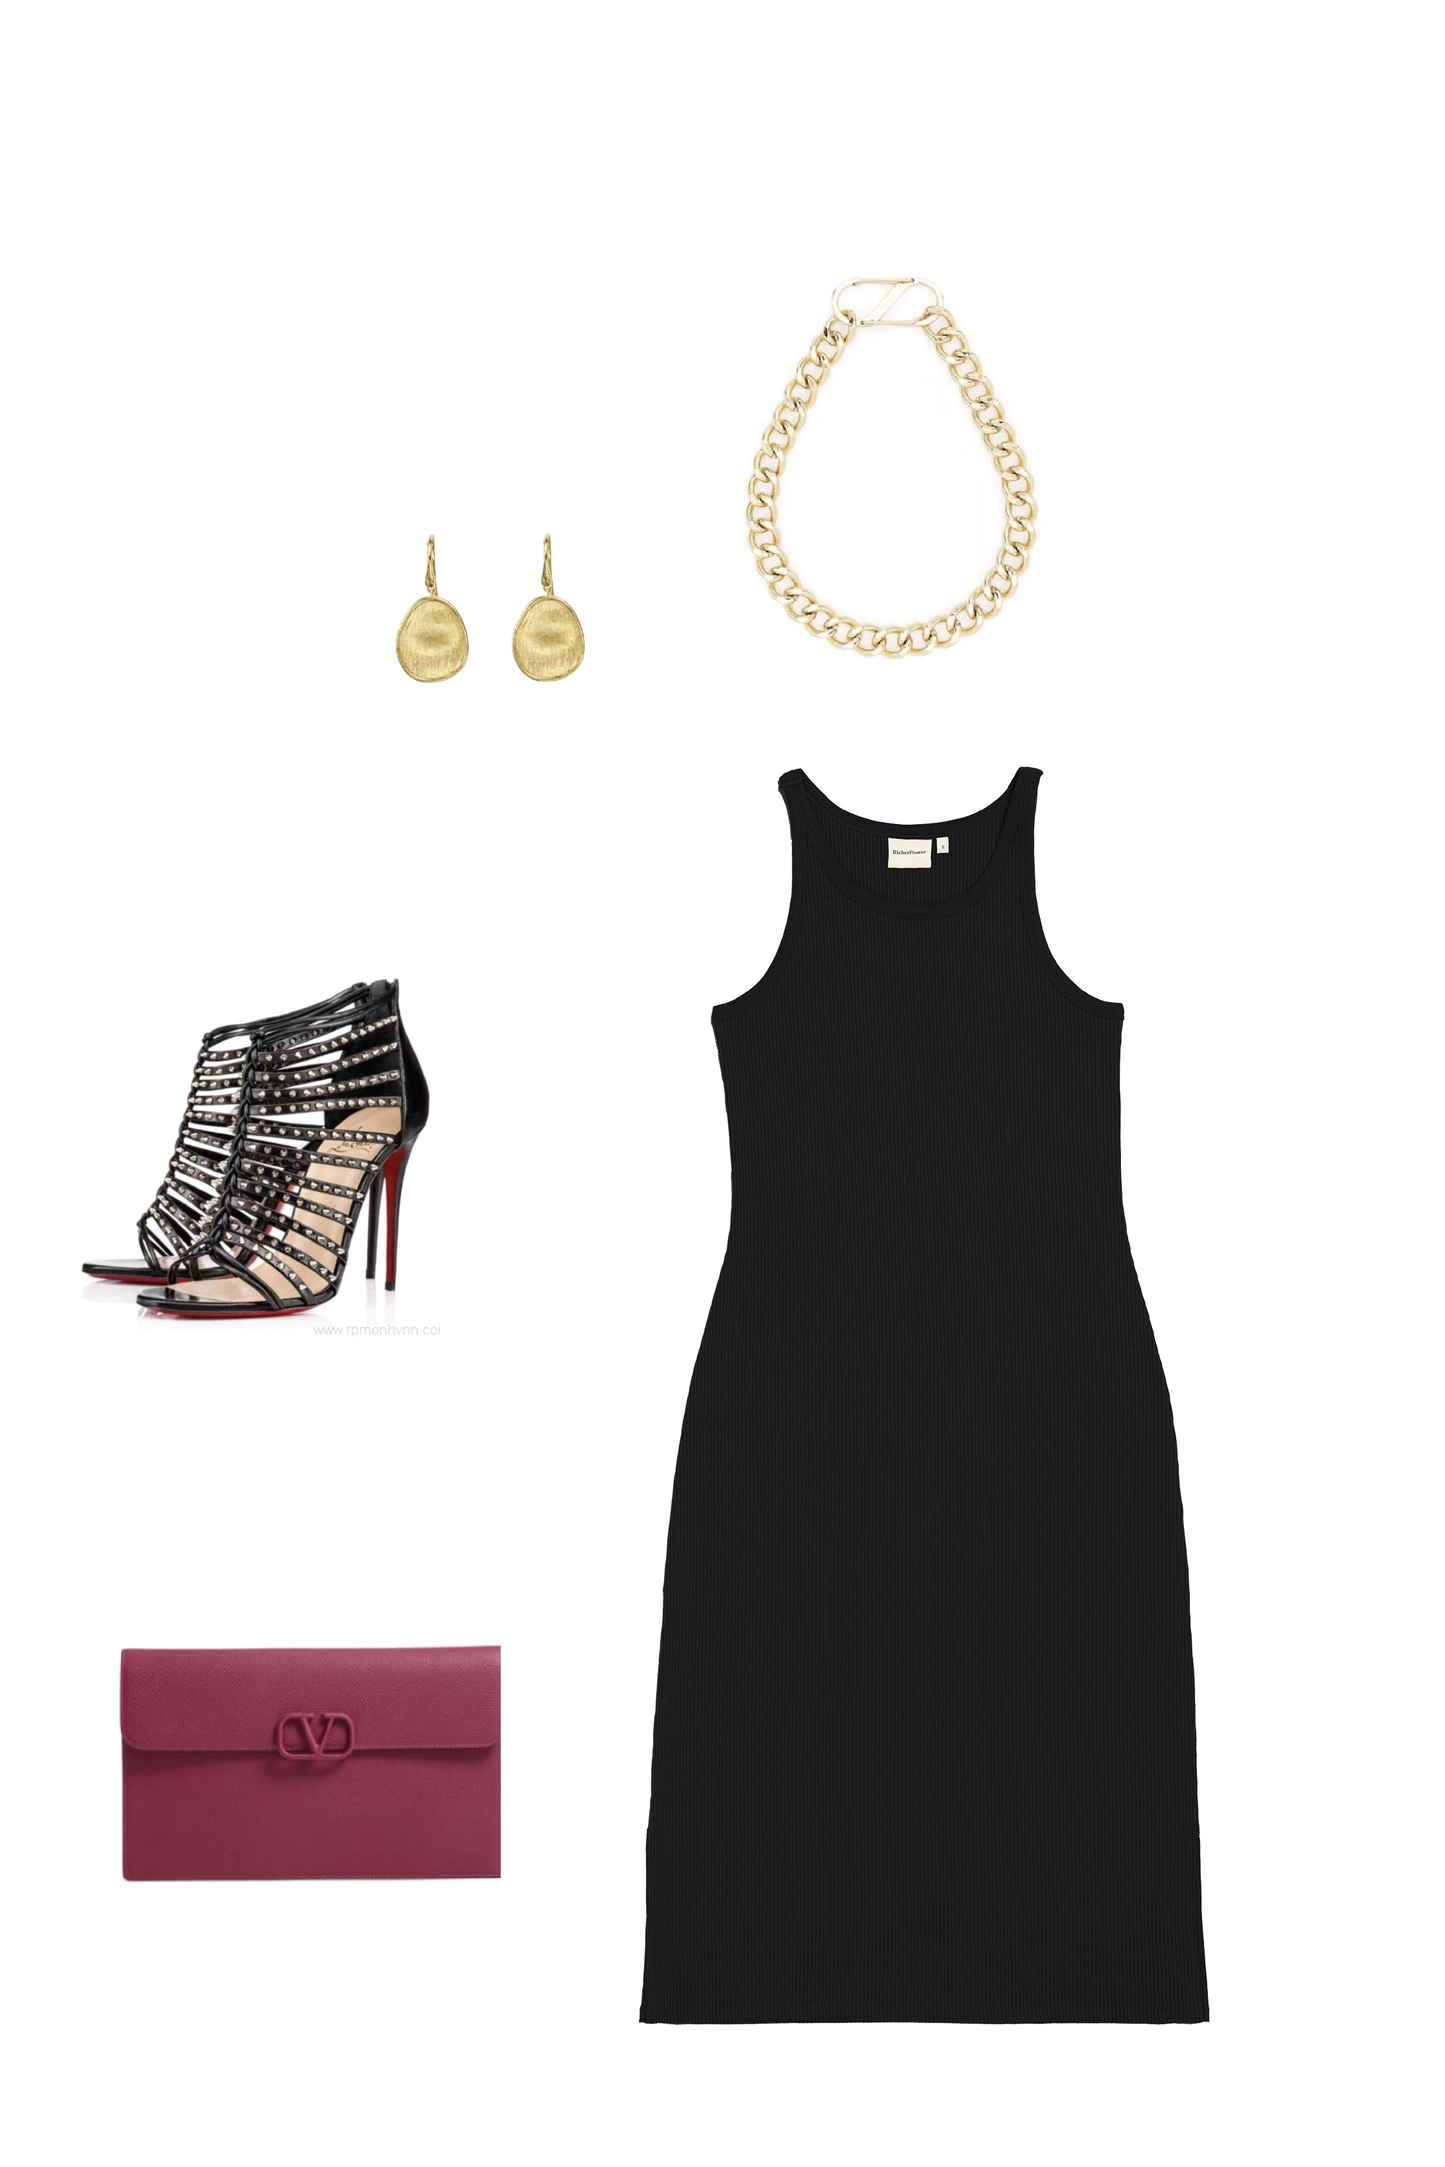 Load image into Gallery viewer, Glow Fashion Boutique Little Black Dress Style
